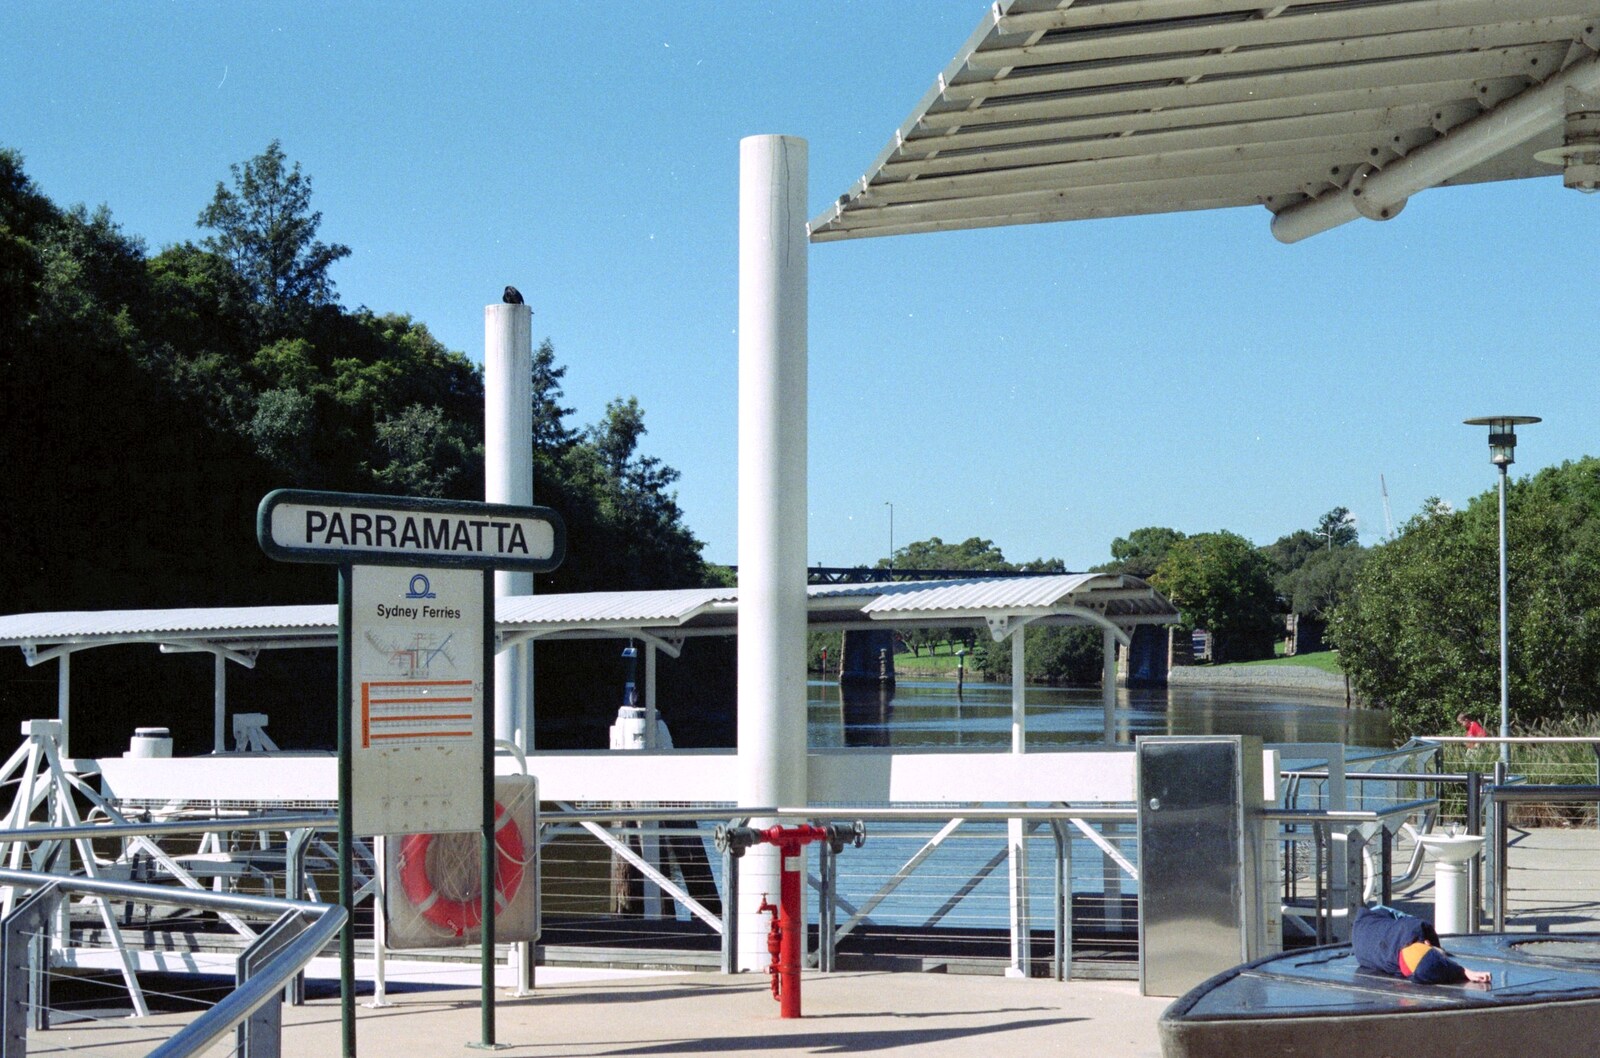 Parramatta ferry terminal from A Trip to the Blue Mountains, New South Wales, Australia - 12th April 2000